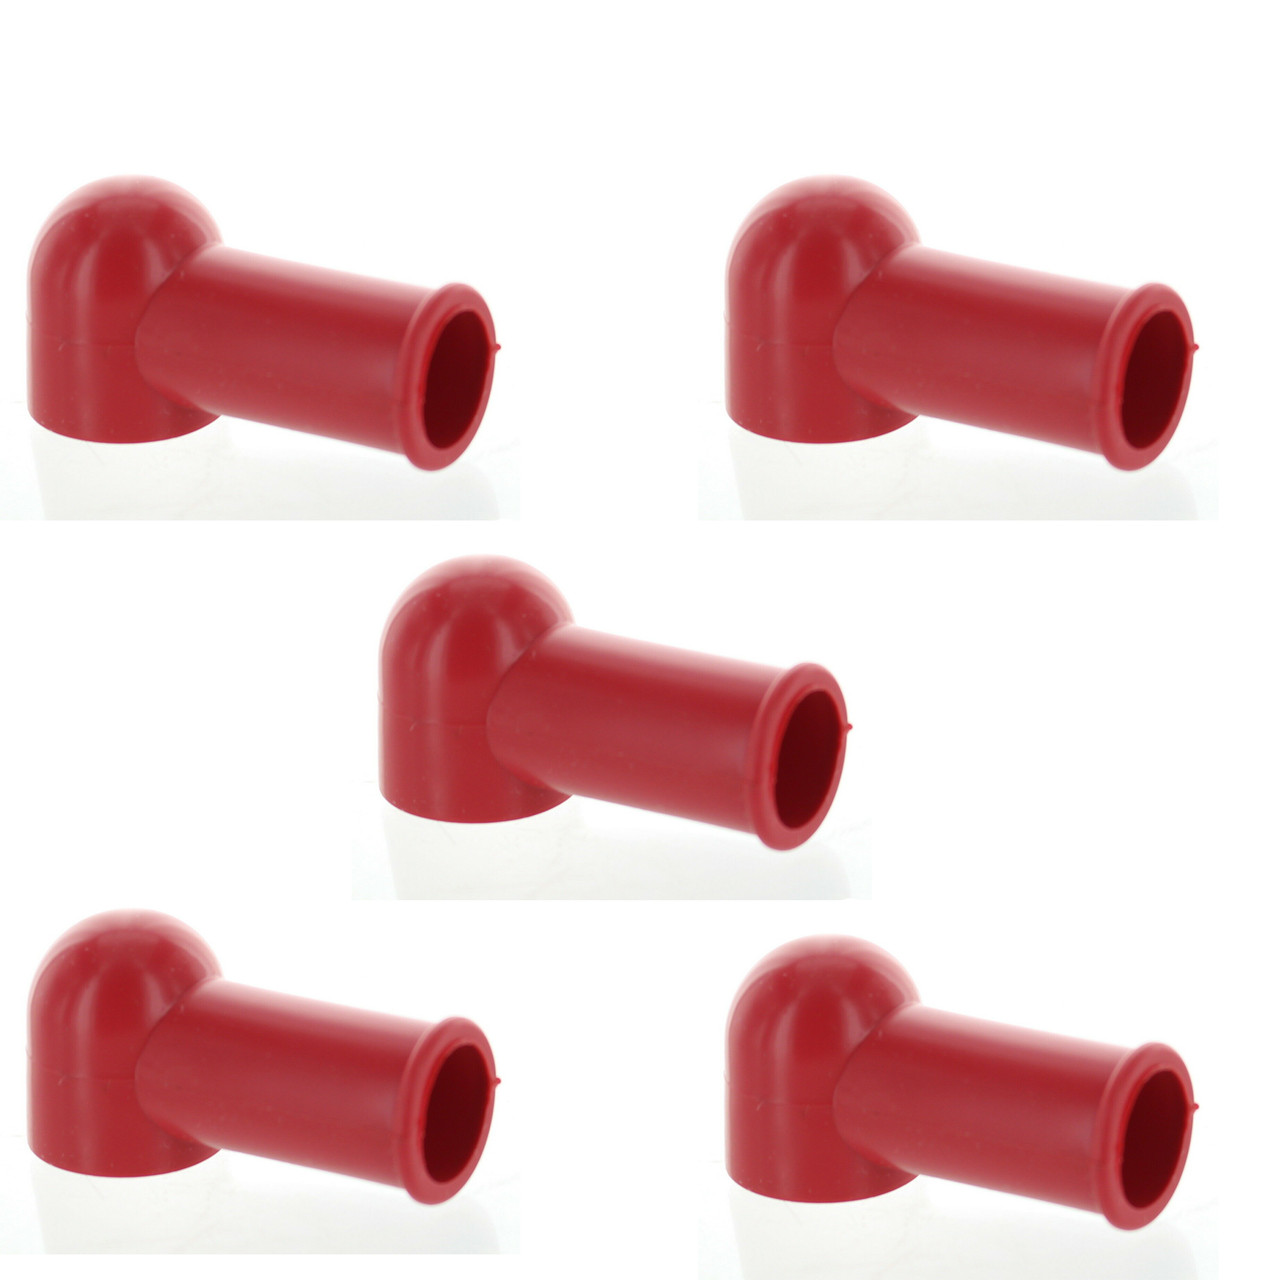 Sea-Doo New OEM Red Protective Boot, Pack of 5, 204471377